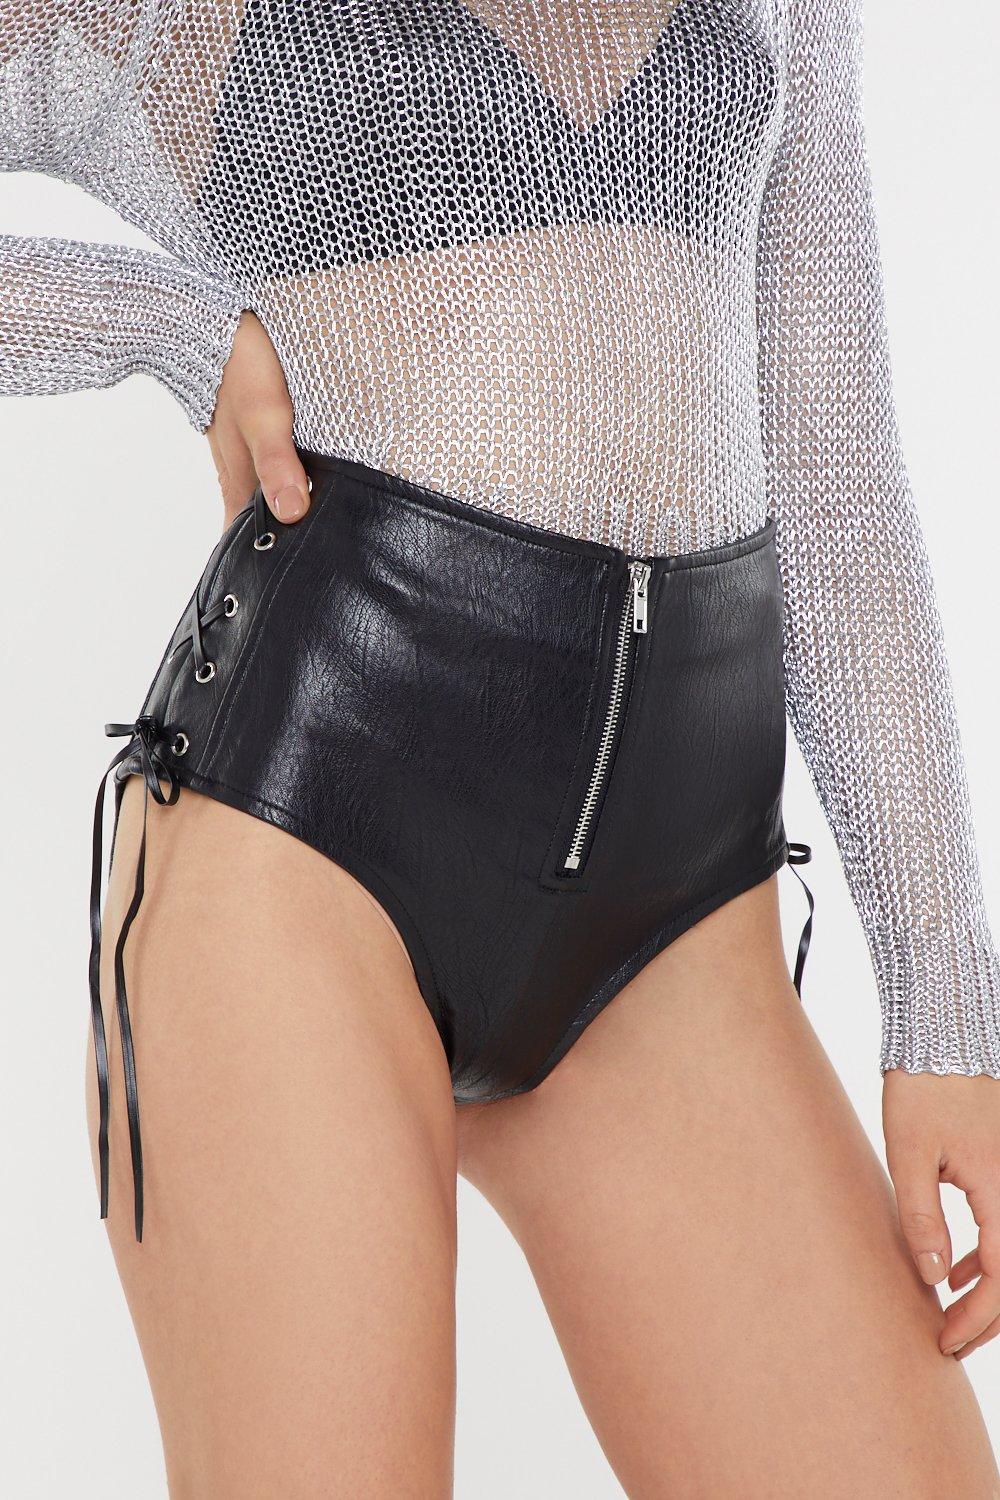 Underwear Don't Care Faux Leather Panty Shorts